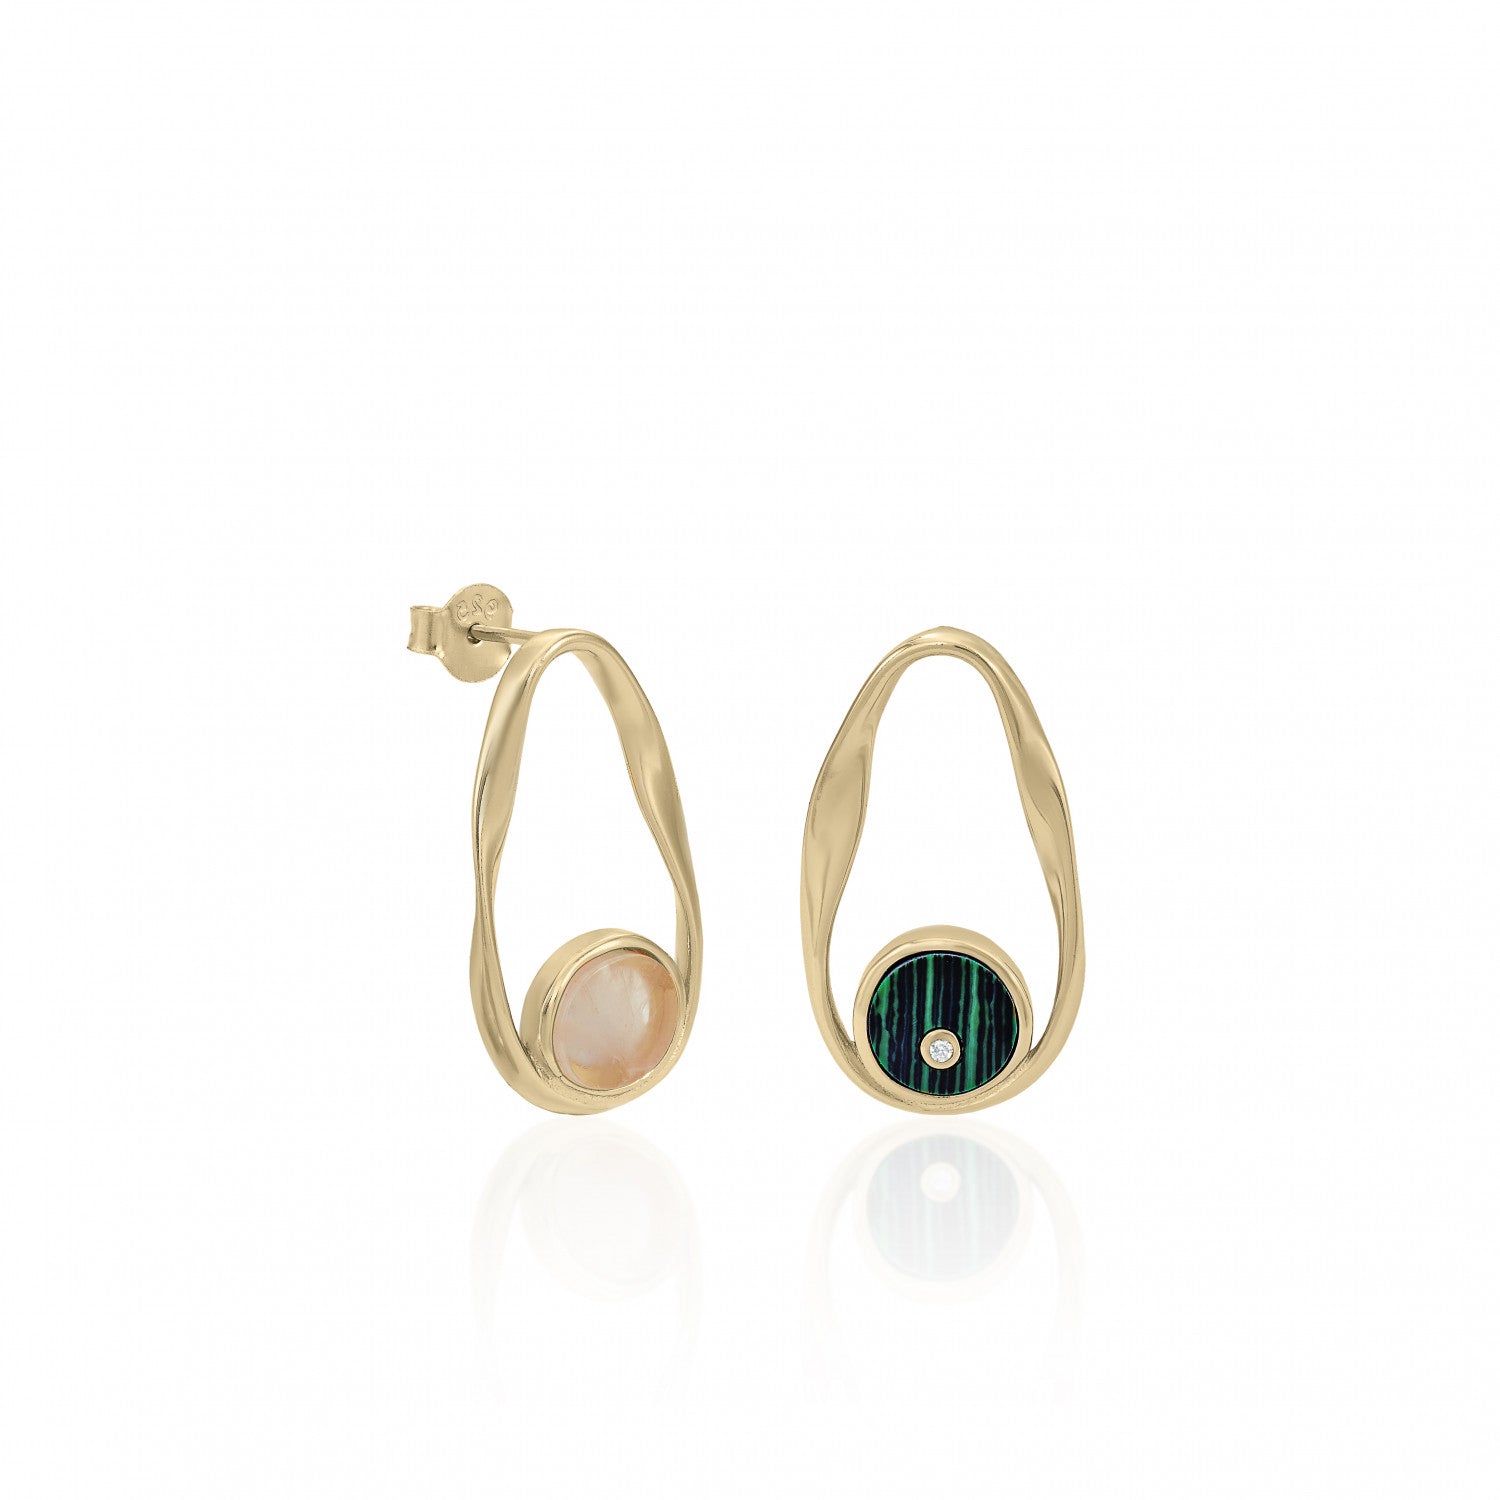 Earrings - Gold-plated natural stone earrings with irregular design